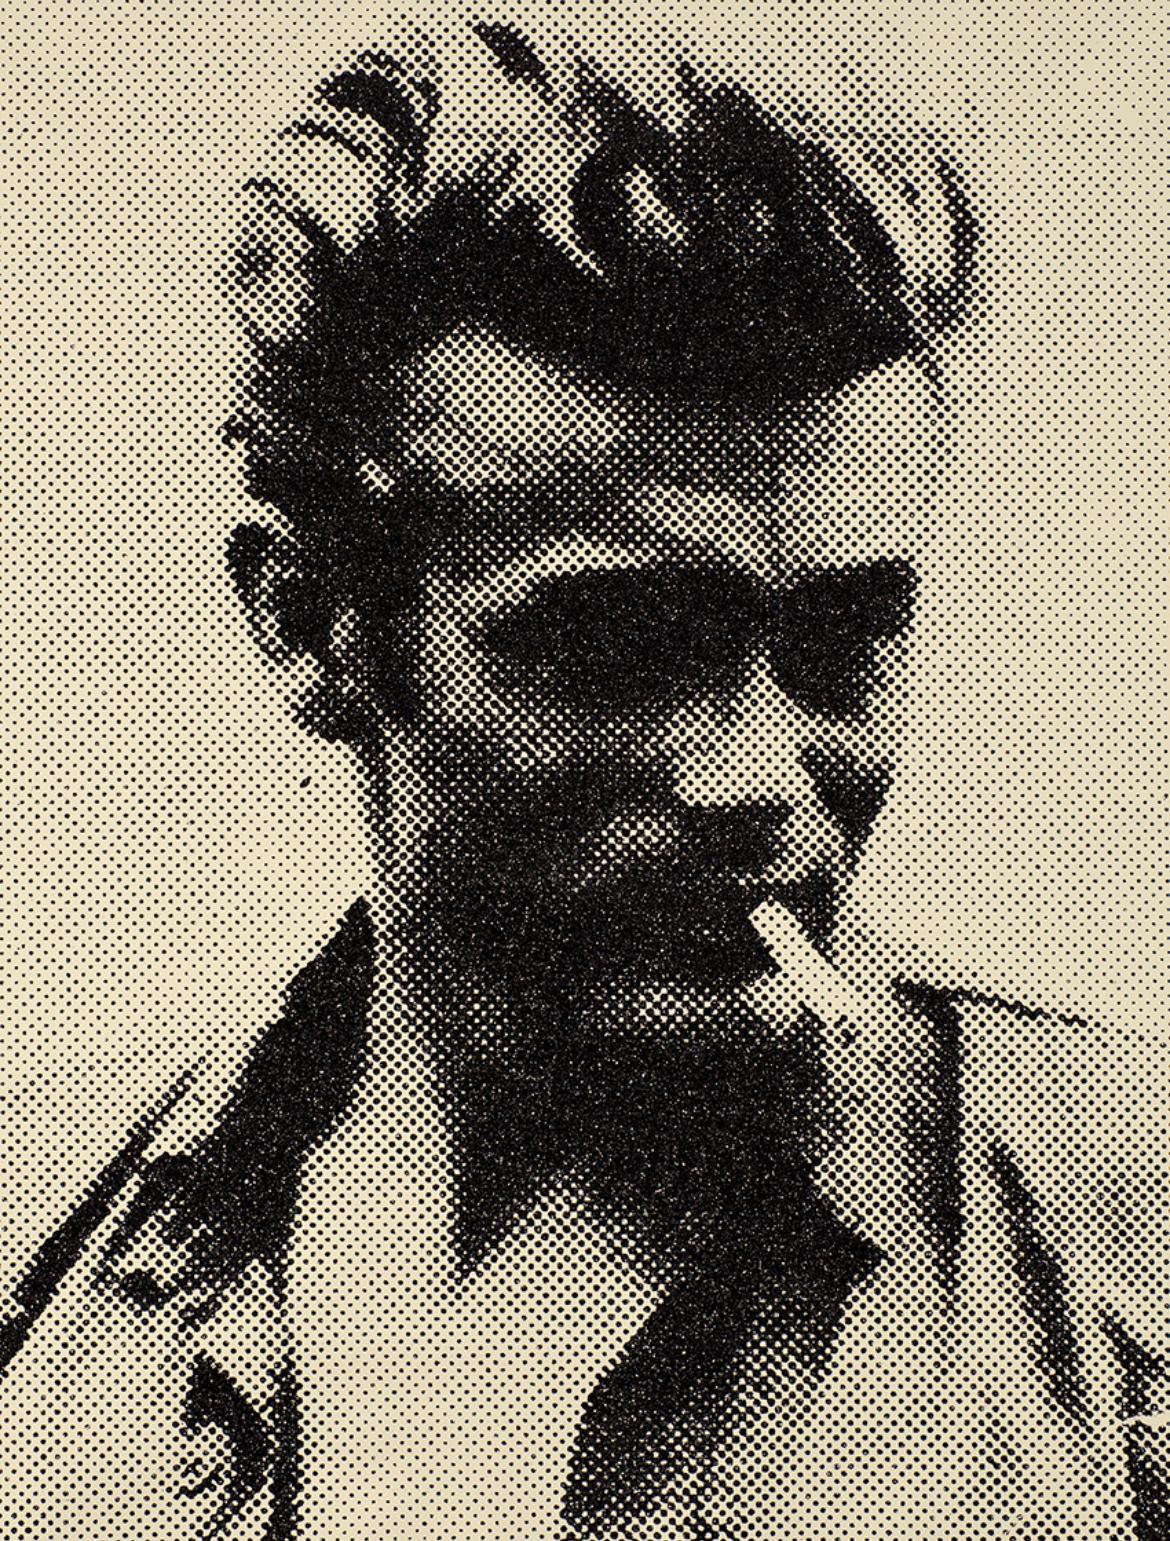 Russell Young Black and White Photograph - JAMES DEAN - B&W - Enamel Screen print and Diamond Dust on Linen - Framed